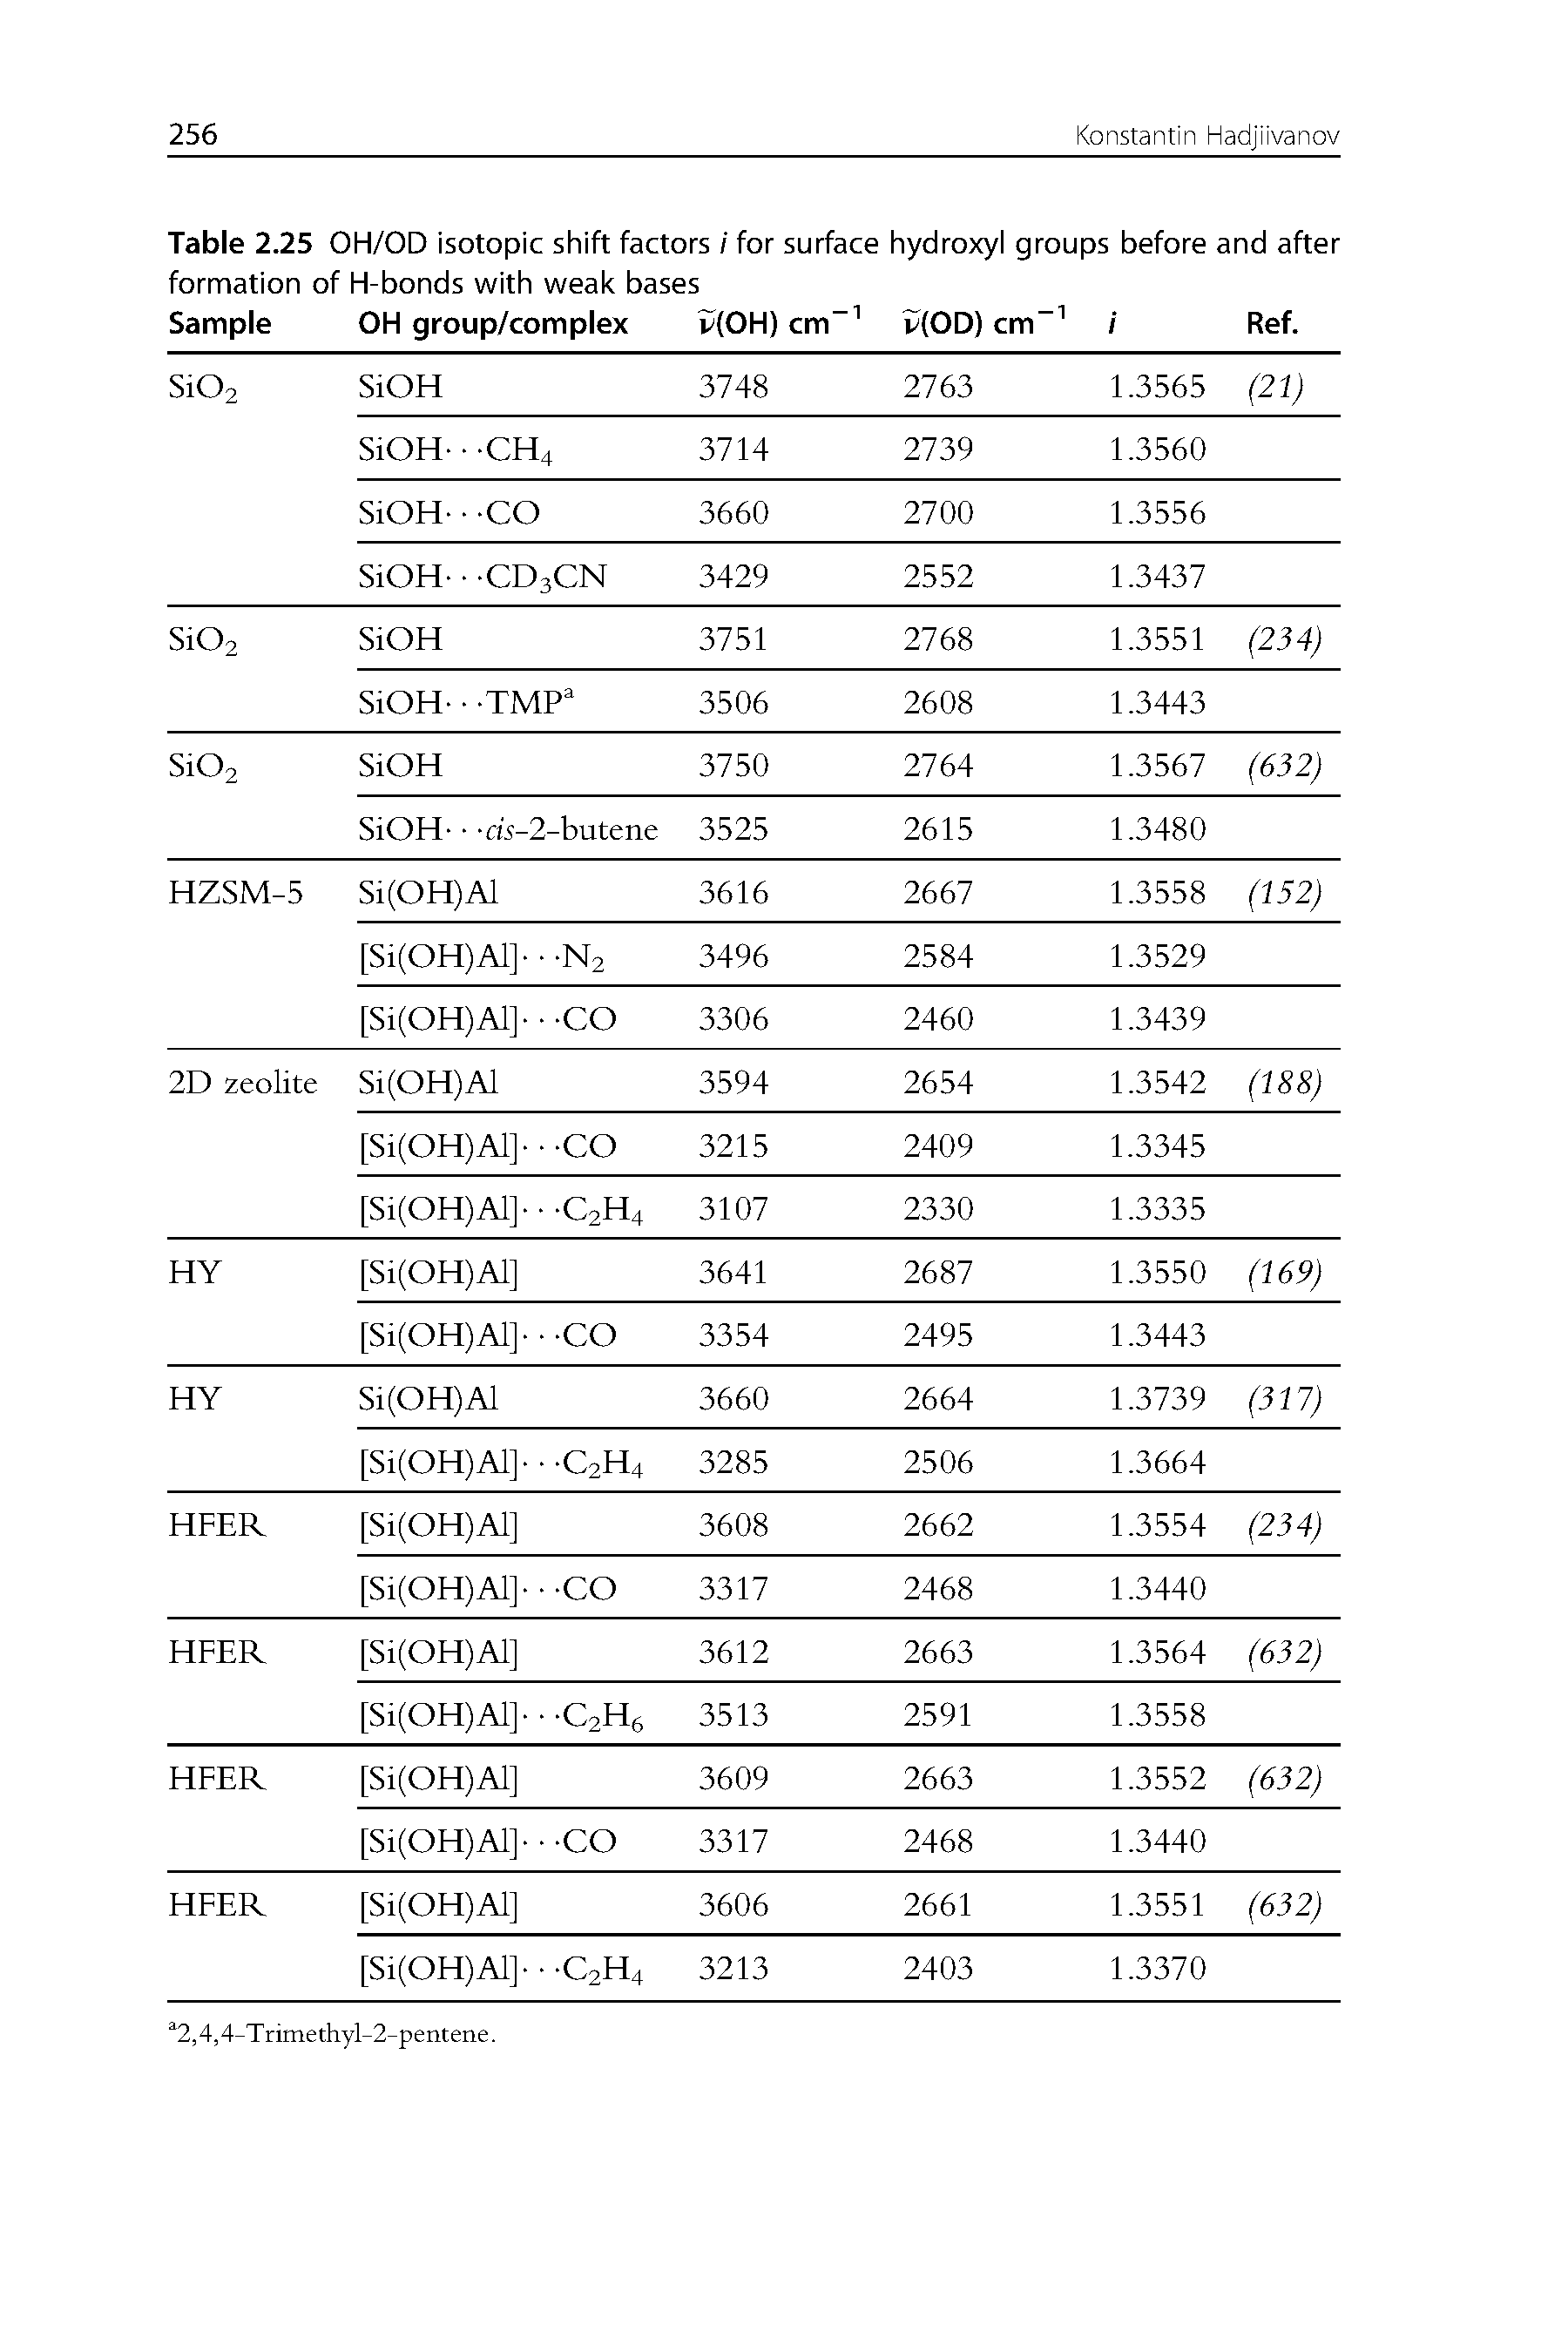 Table 2.25 OH/OD isotopic shift factors / for surface hydroxyl groups before and after ...